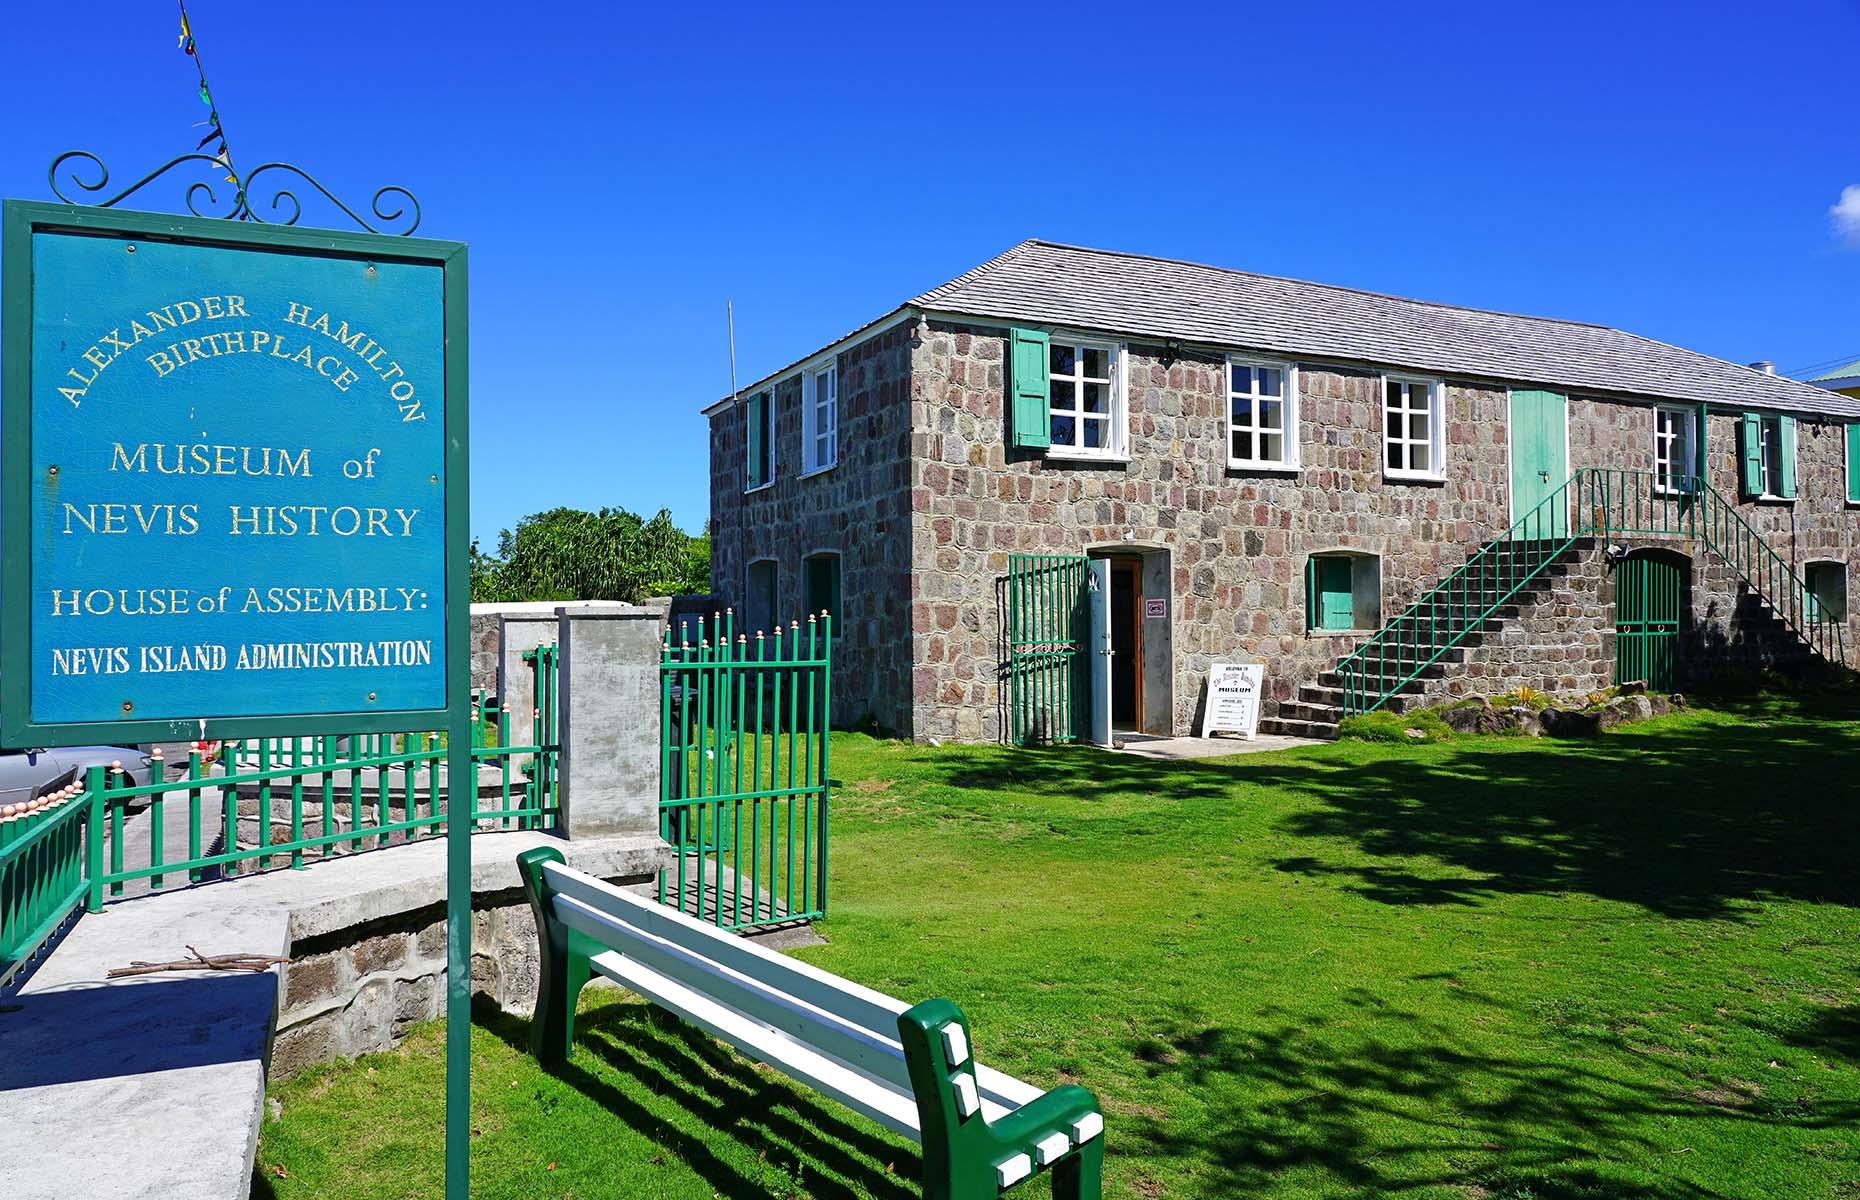 <p>If you’re passing through Charlestown, be sure to stop at the <a href="https://www.nevisheritage.org/">Museum of Nevis History</a> – housed in a quaint, Georgian-style building – to brush up on your local knowledge. Here, you can learn about the island’s original Amerindian inhabitants, the Arawak and the Carib, and find out more about the kingdoms that existed in Africa before slavery. The exhibition documents key milestones in Nevis’ history, from the slave trade to emancipation and independence, as well as shining a light on the African influences still present in the island’s language, food and music today.</p>